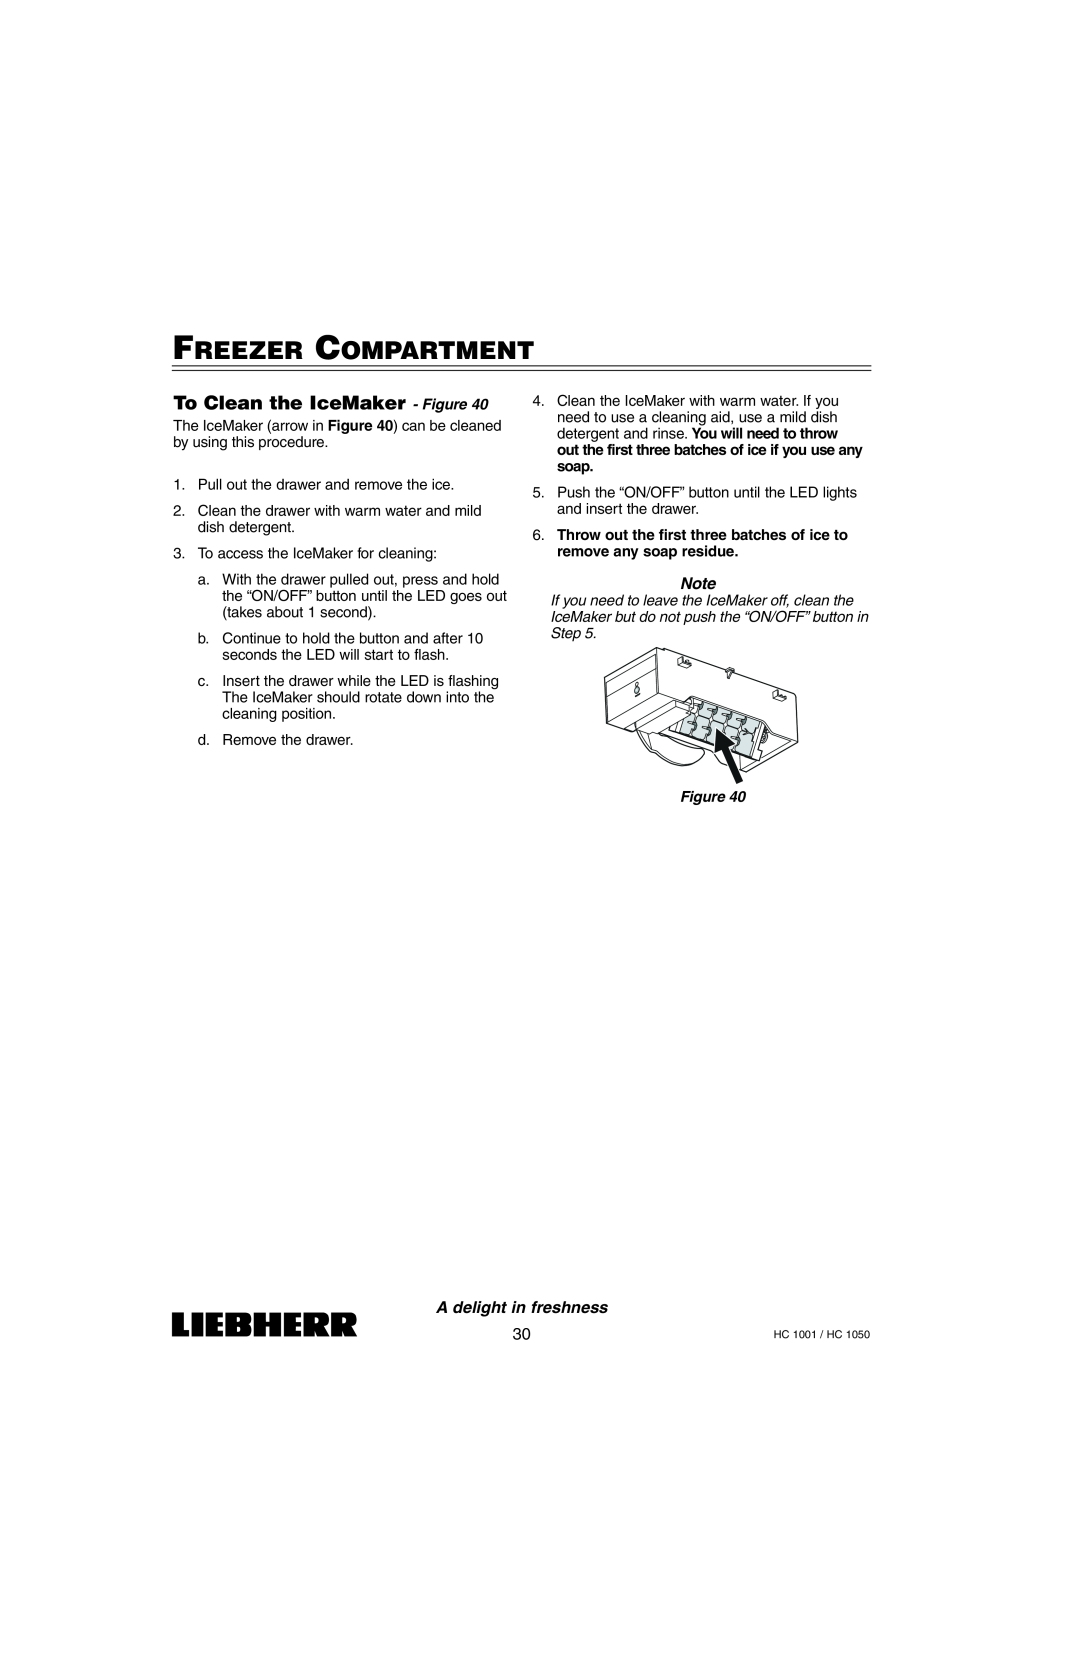 Liebherr HC1001, HC1050 installation manual To Clean the IceMaker - Figure, Freezer Compartment, A delight in freshness 